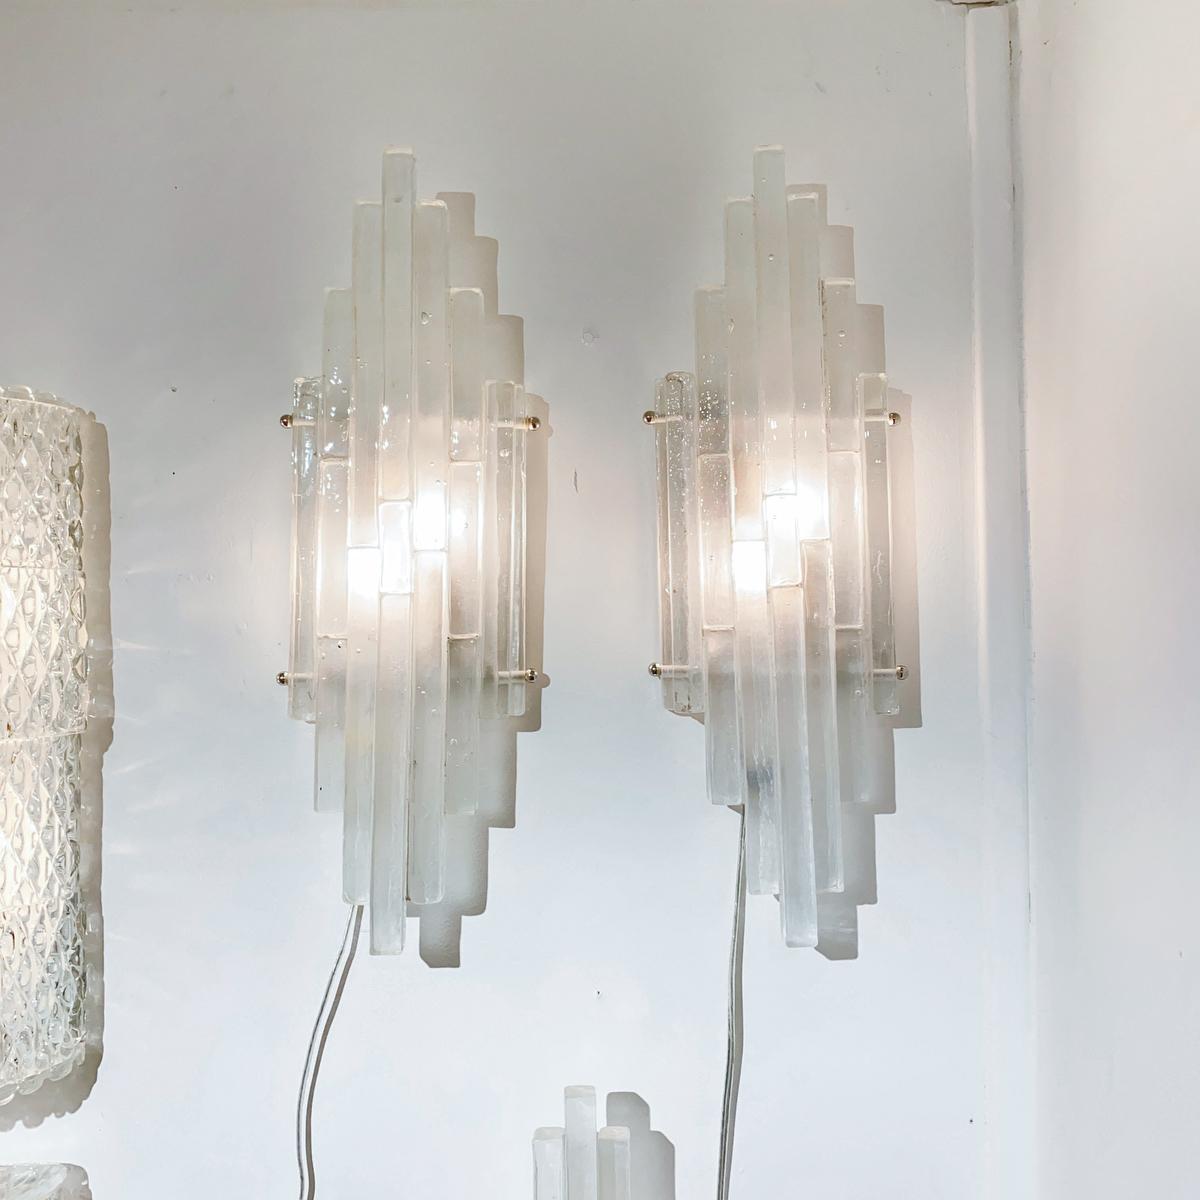 Sconces composed of clustered frosted glass strips in a graduated arrangement by Poliarte.